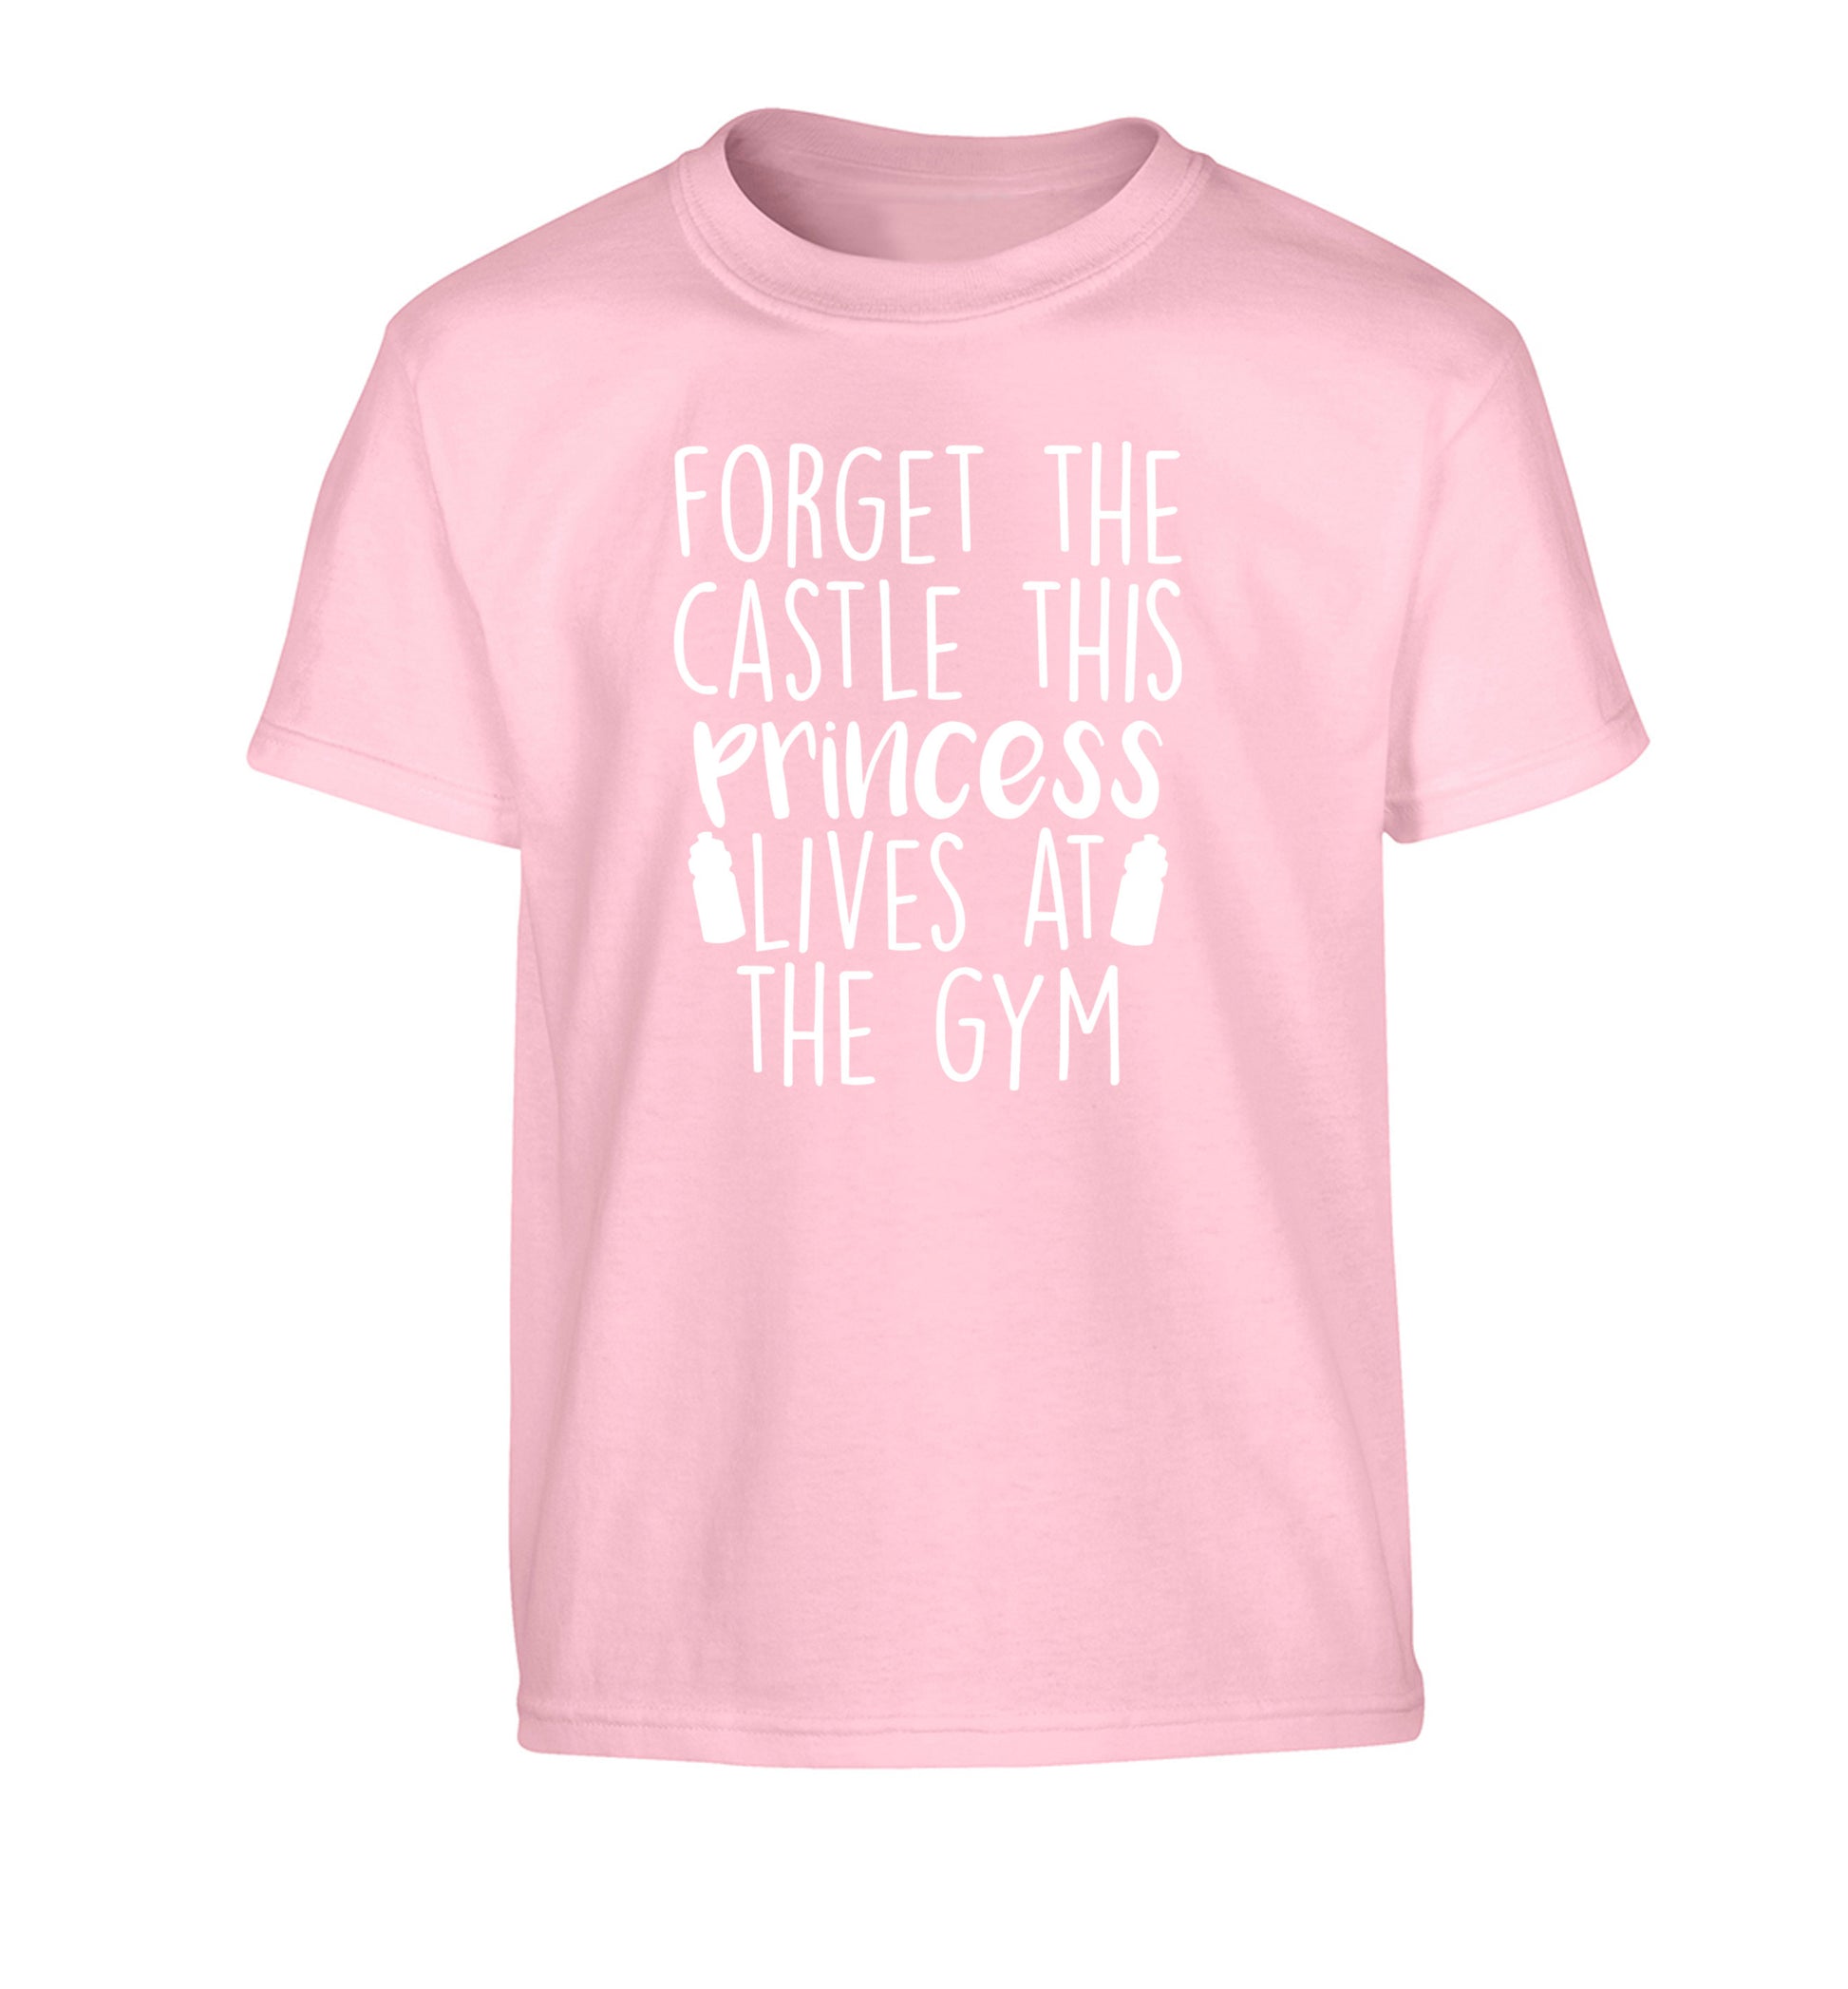 Forget the castle this princess lives at the gym Children's light pink Tshirt 12-14 Years